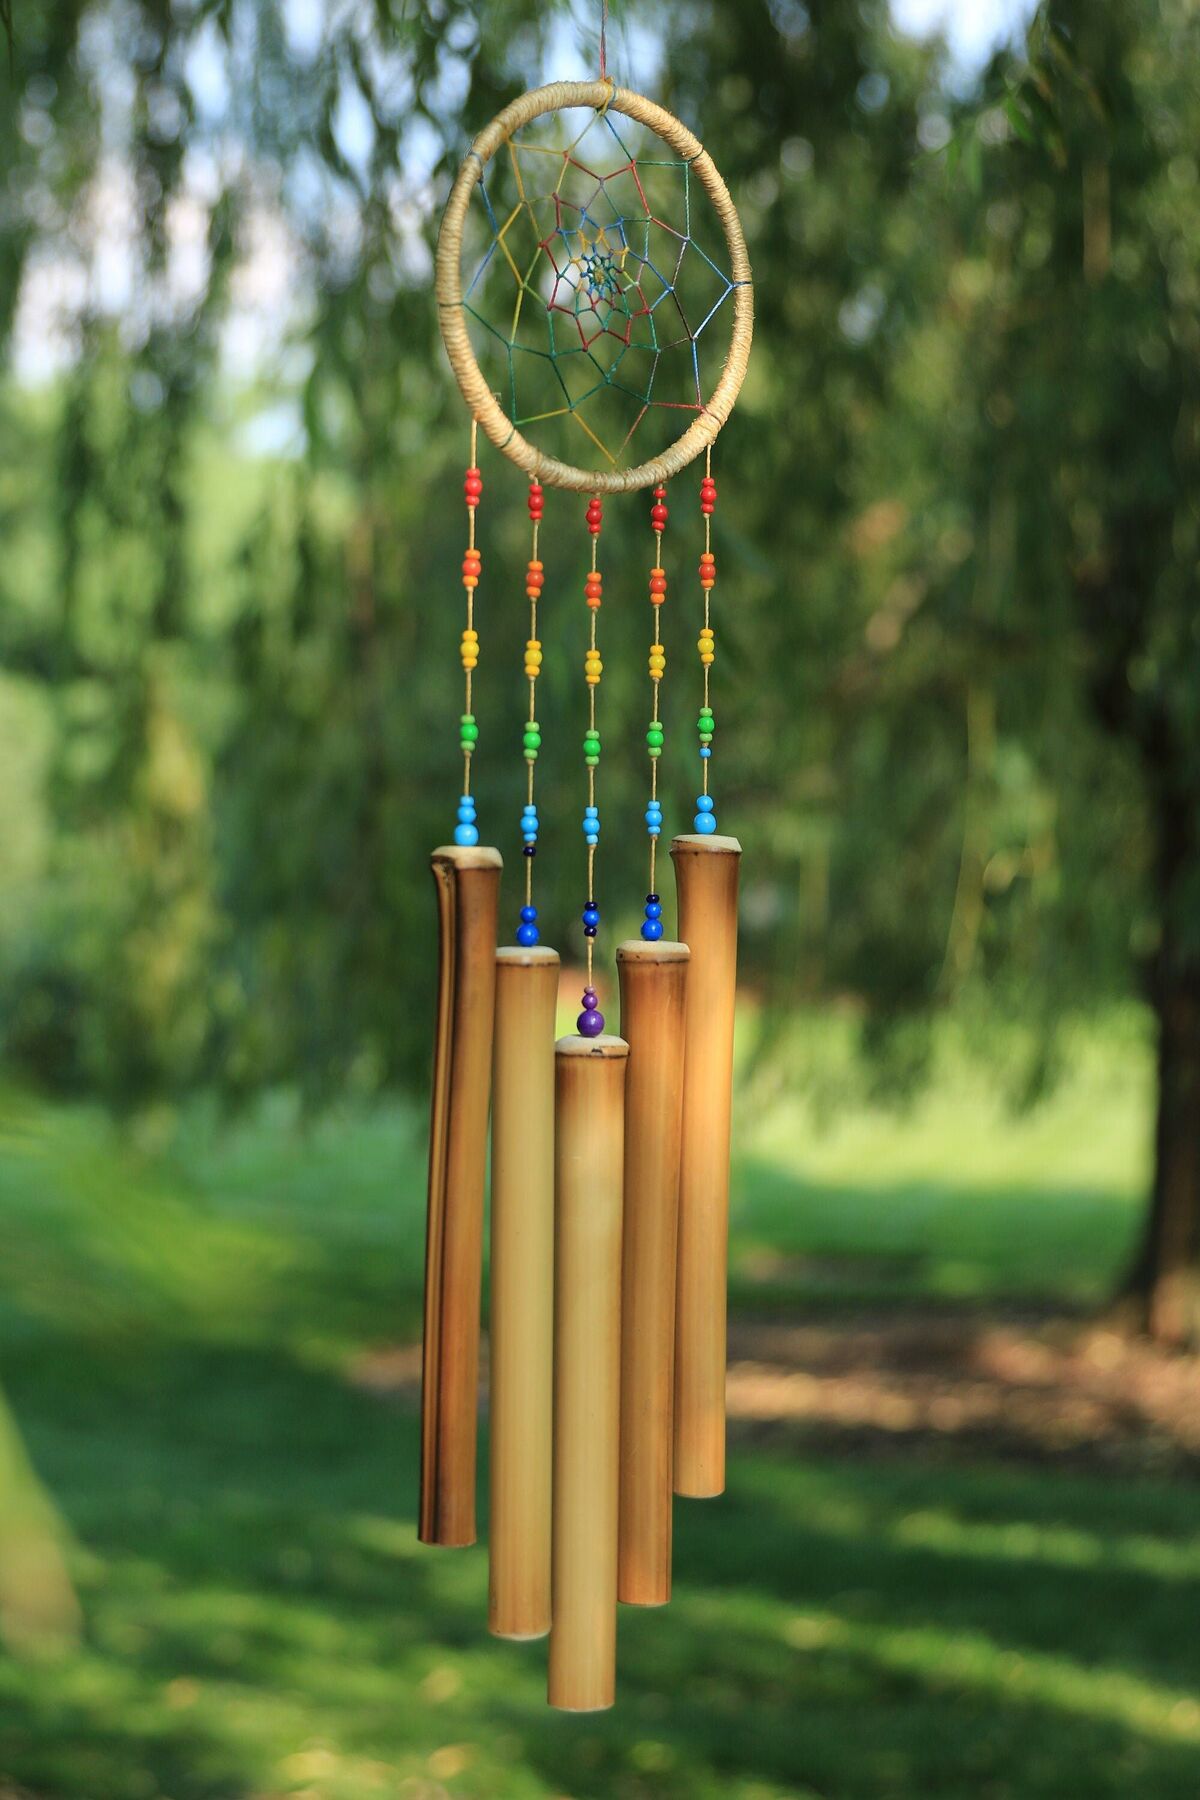 A dream catcher with wooden wind chimes